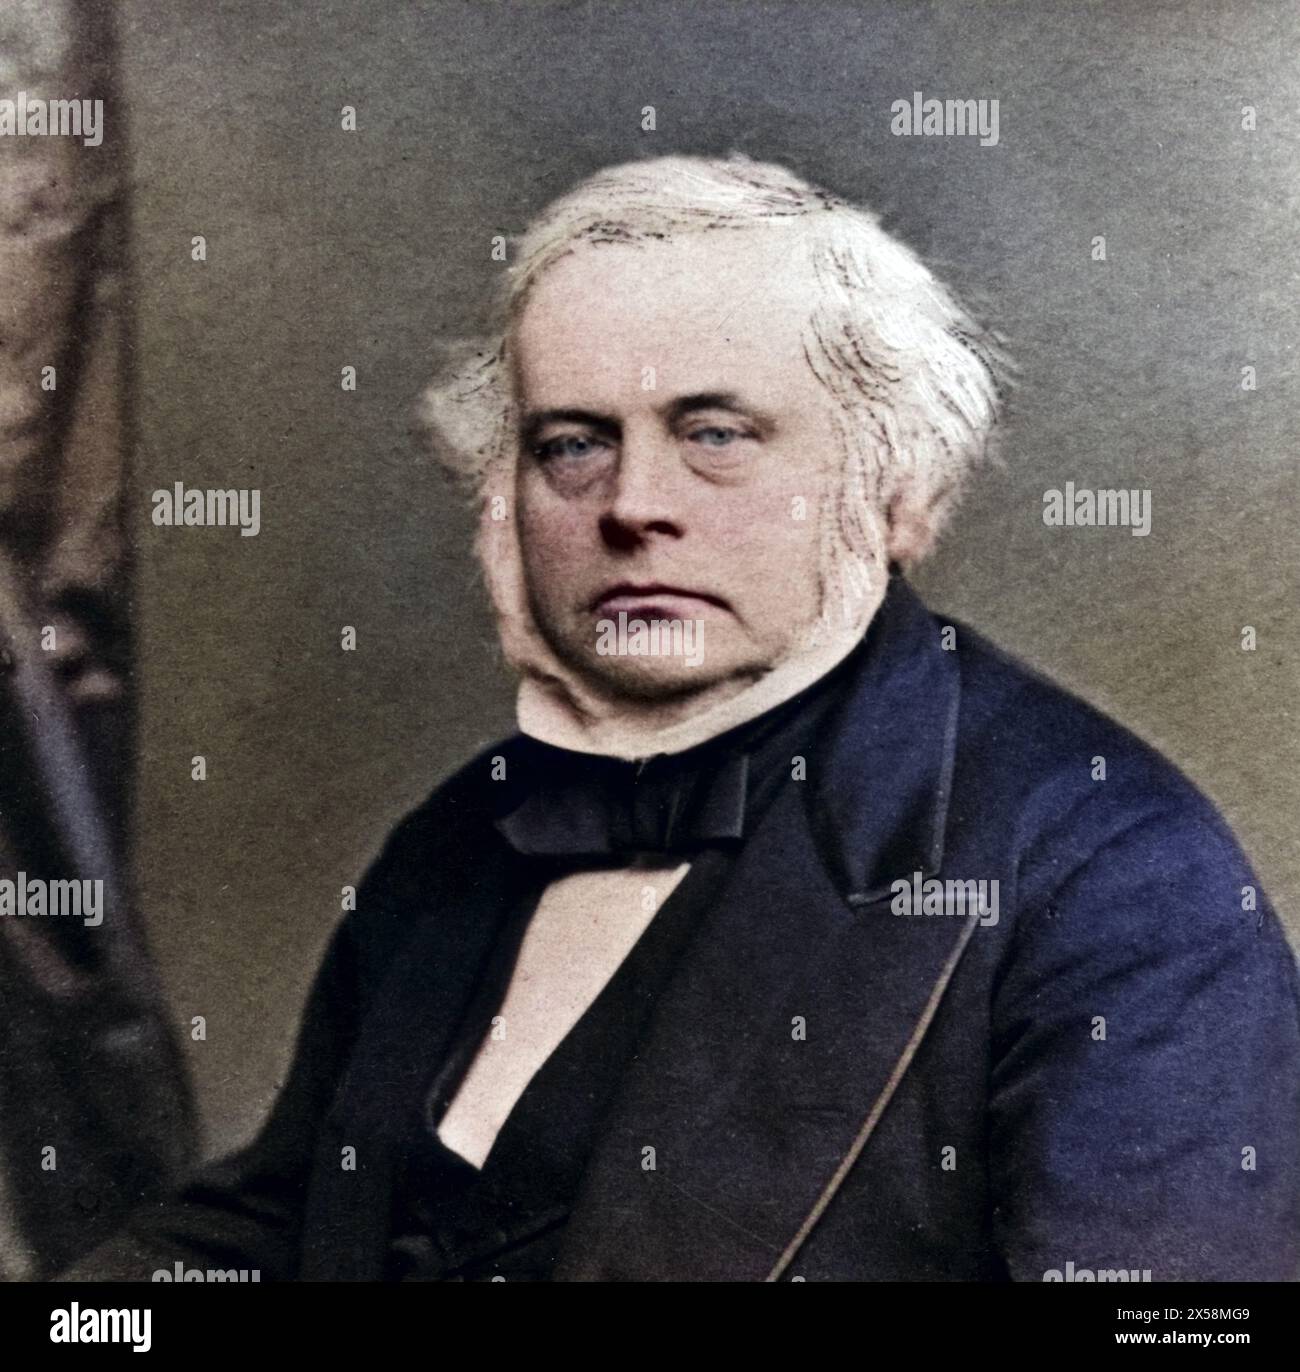 Bright, John, 16.11.1811 - 27.3,1889, britischer Politiker, Präsident des Board of Trade, ADDITIONAL-RIGHTS-CLEARANCE-INFO-NOT-AVAILABLE Stockfoto